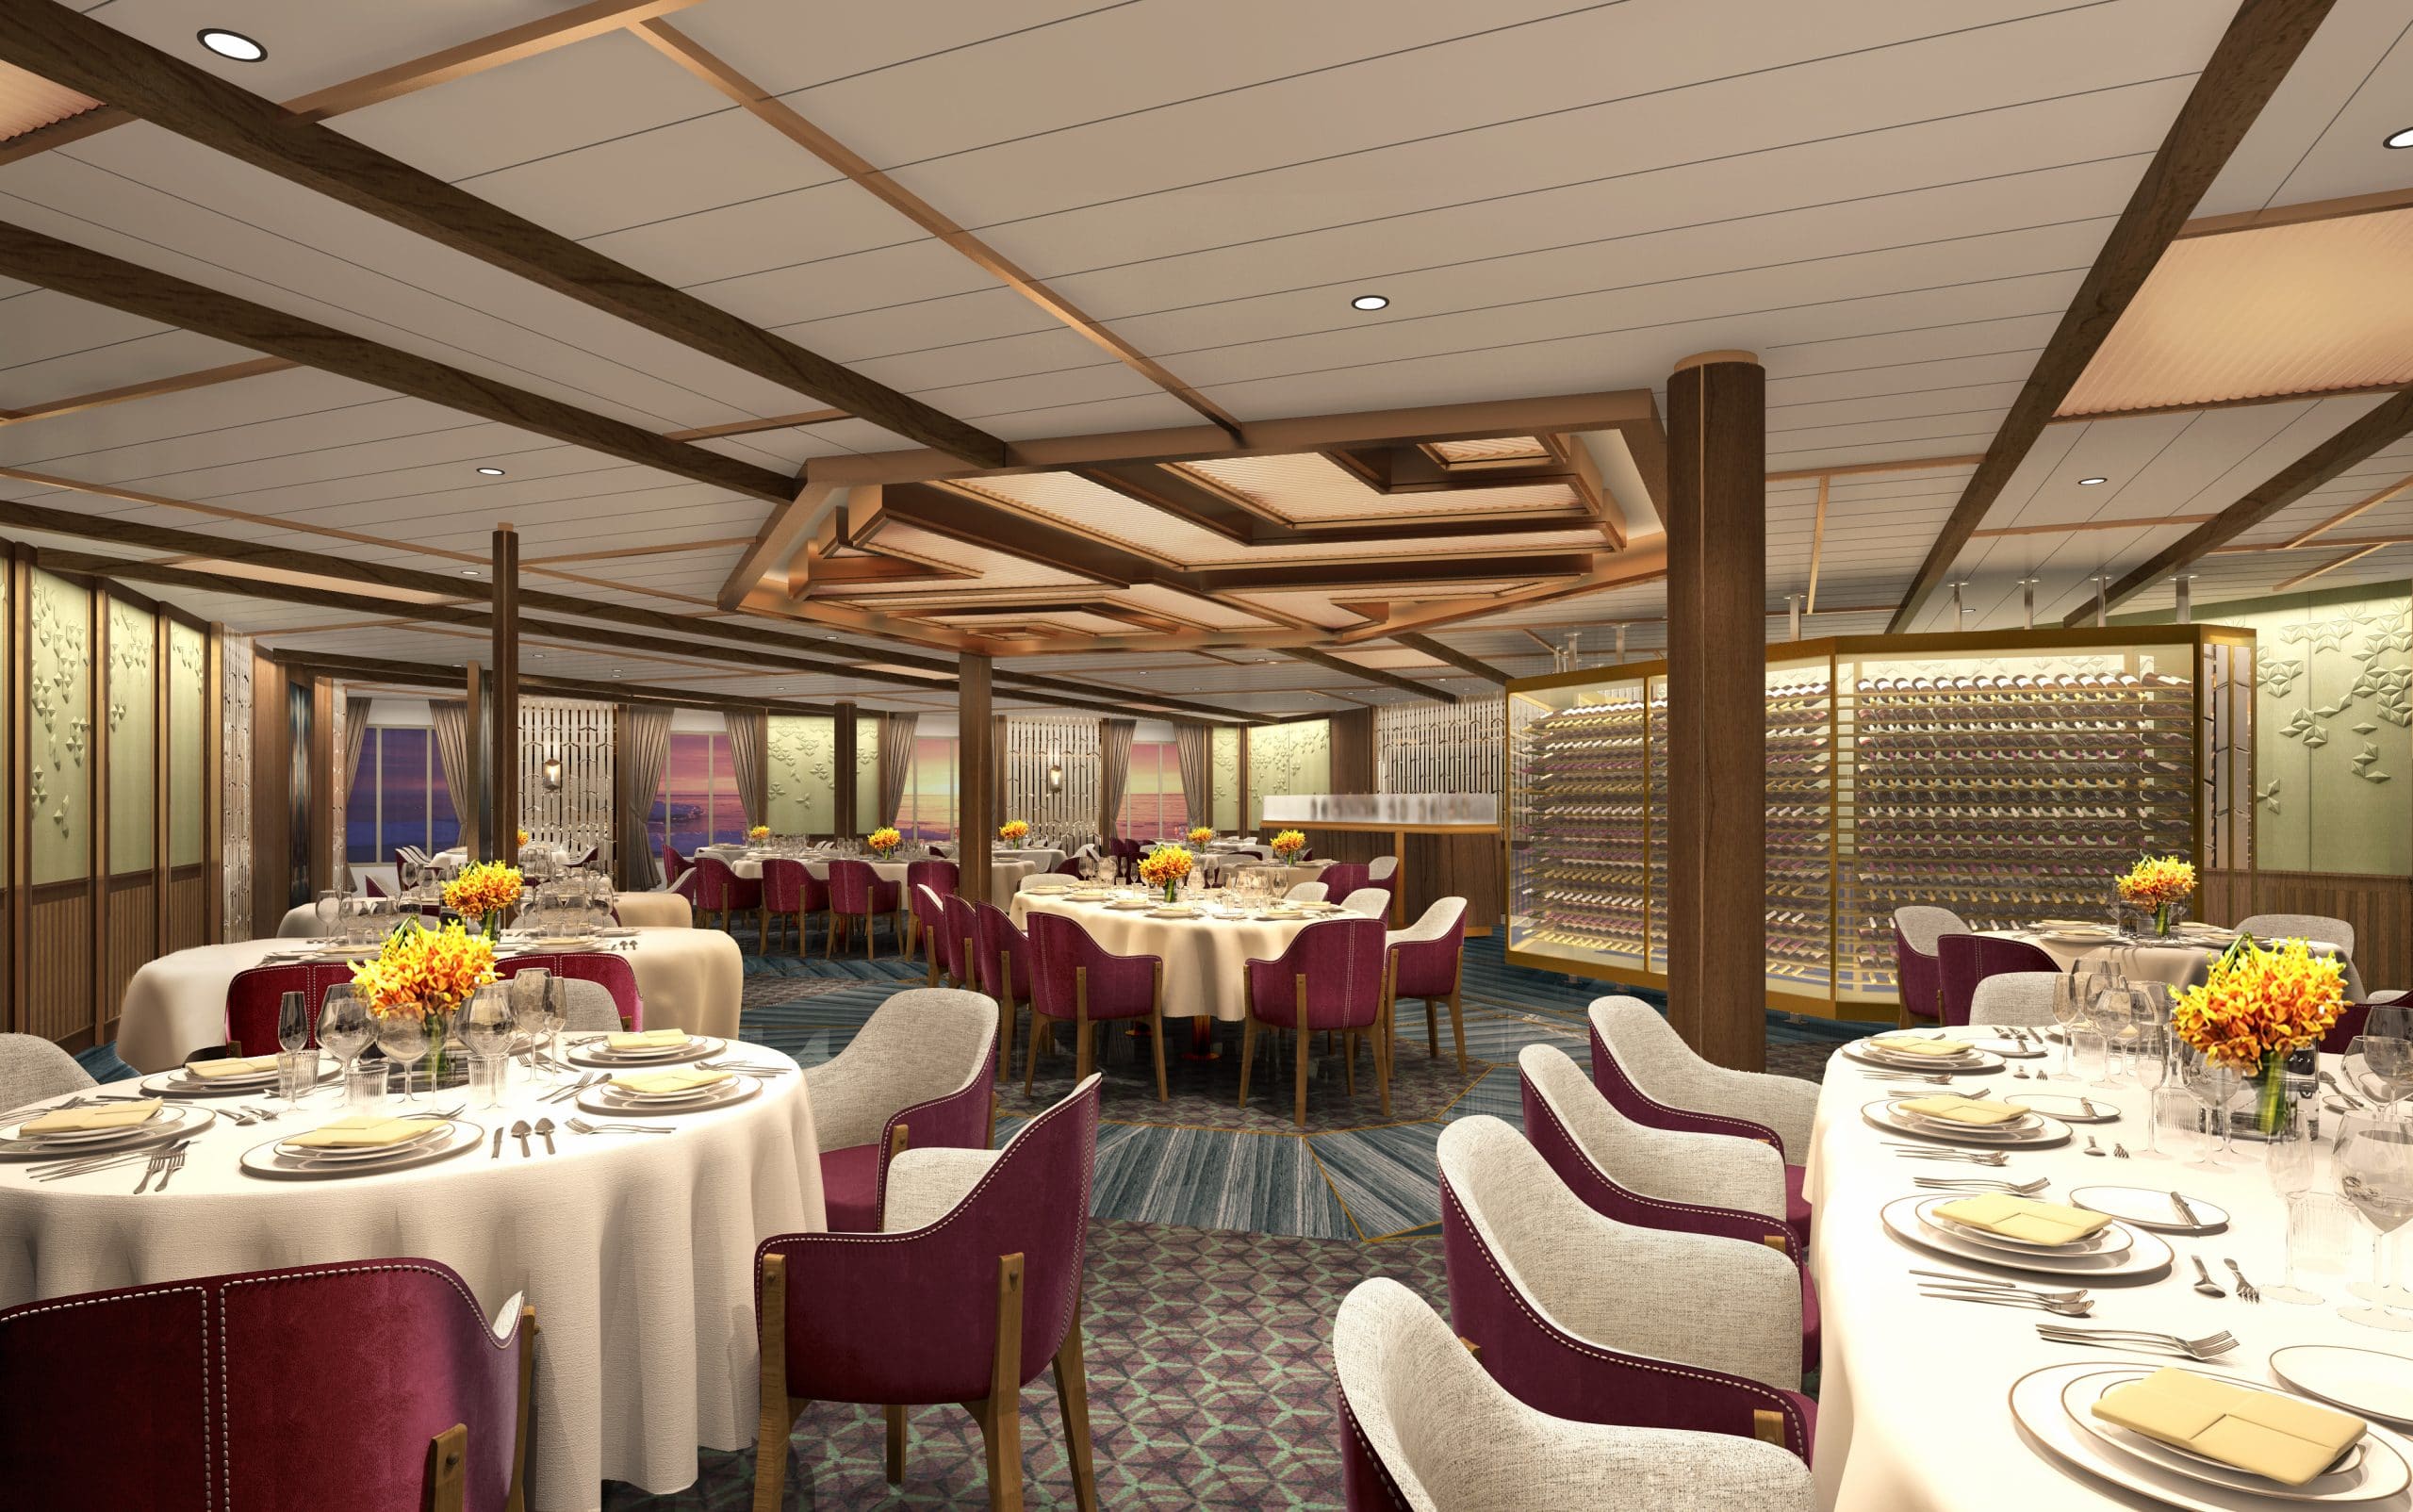 Seabourn expedition ships - The Restaurant rendering